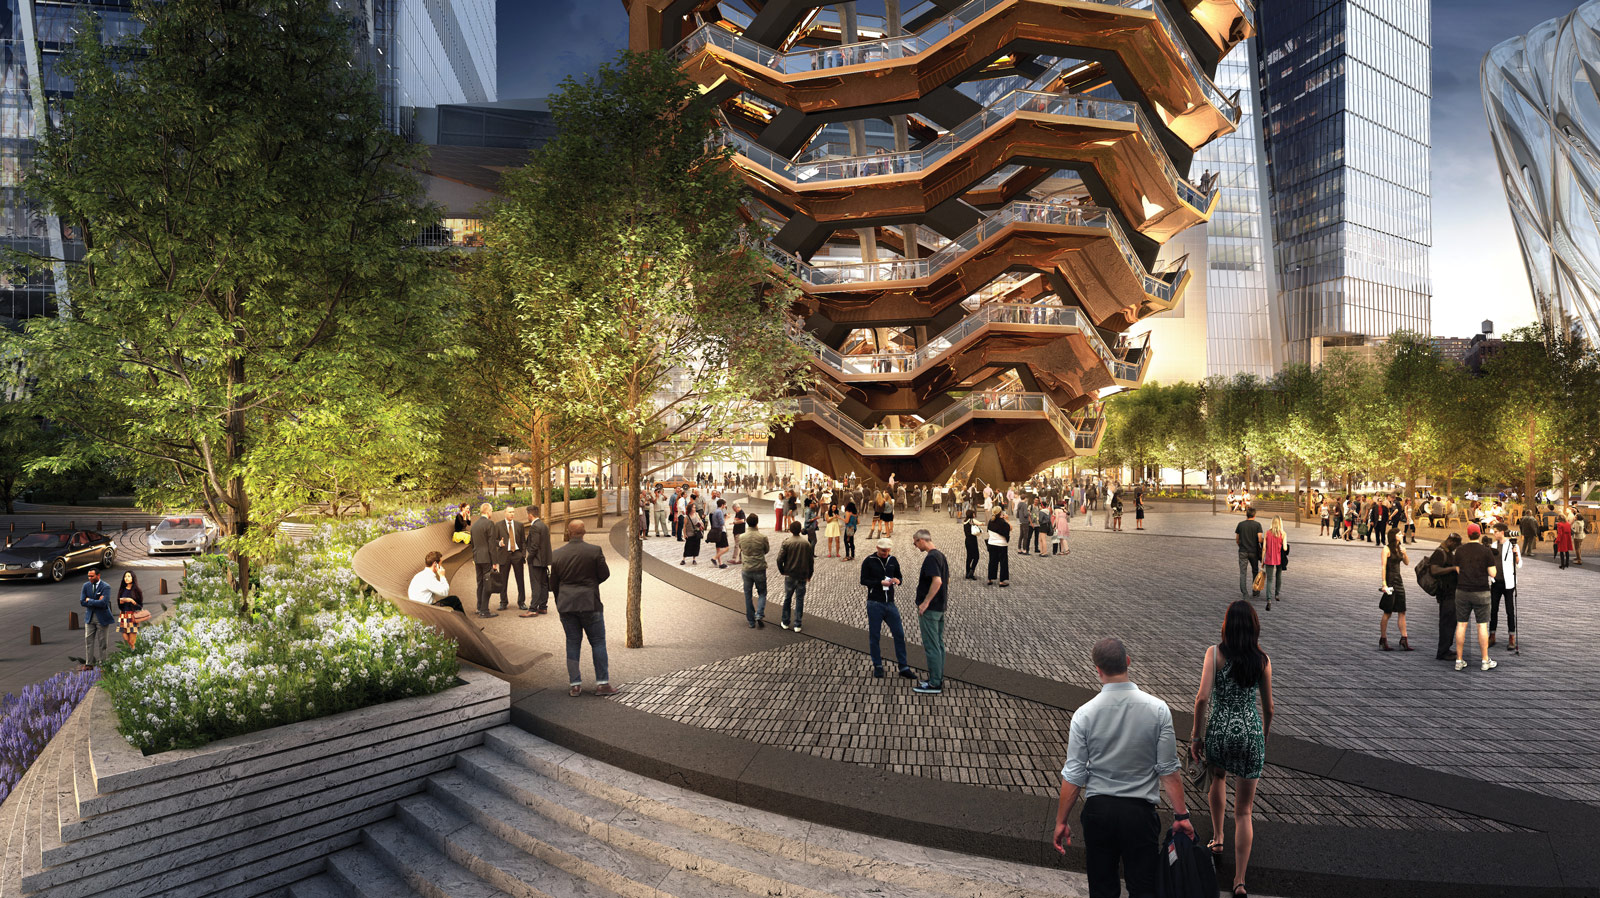 A five-acre garden, designed by Nelson Byrd Woltz and planted with all native flora, will provide a stage for Heatherwick Studio’s Vessel, a privately-funded public work of architecture at Hudson Yards. (Courtesy Nelson Byrd Woltz)